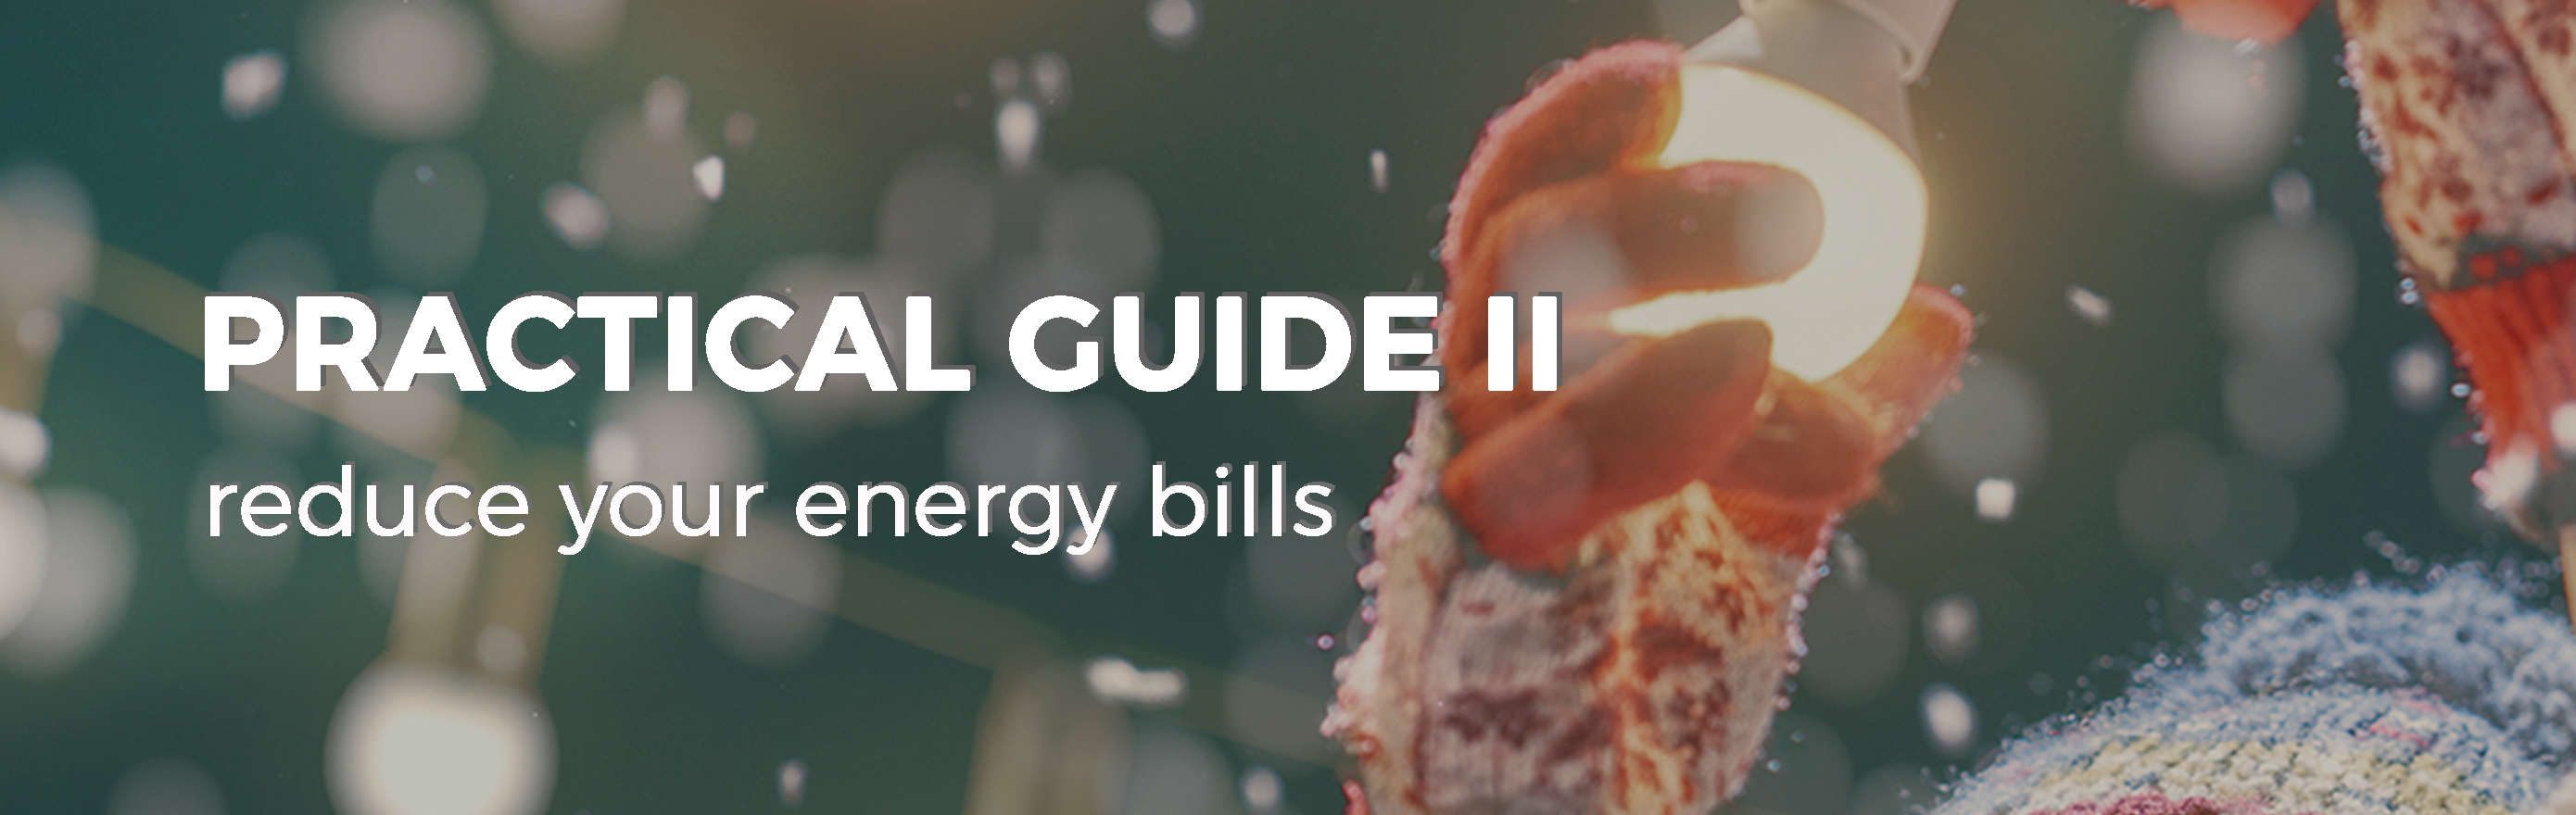 Practical guide to save energy - II